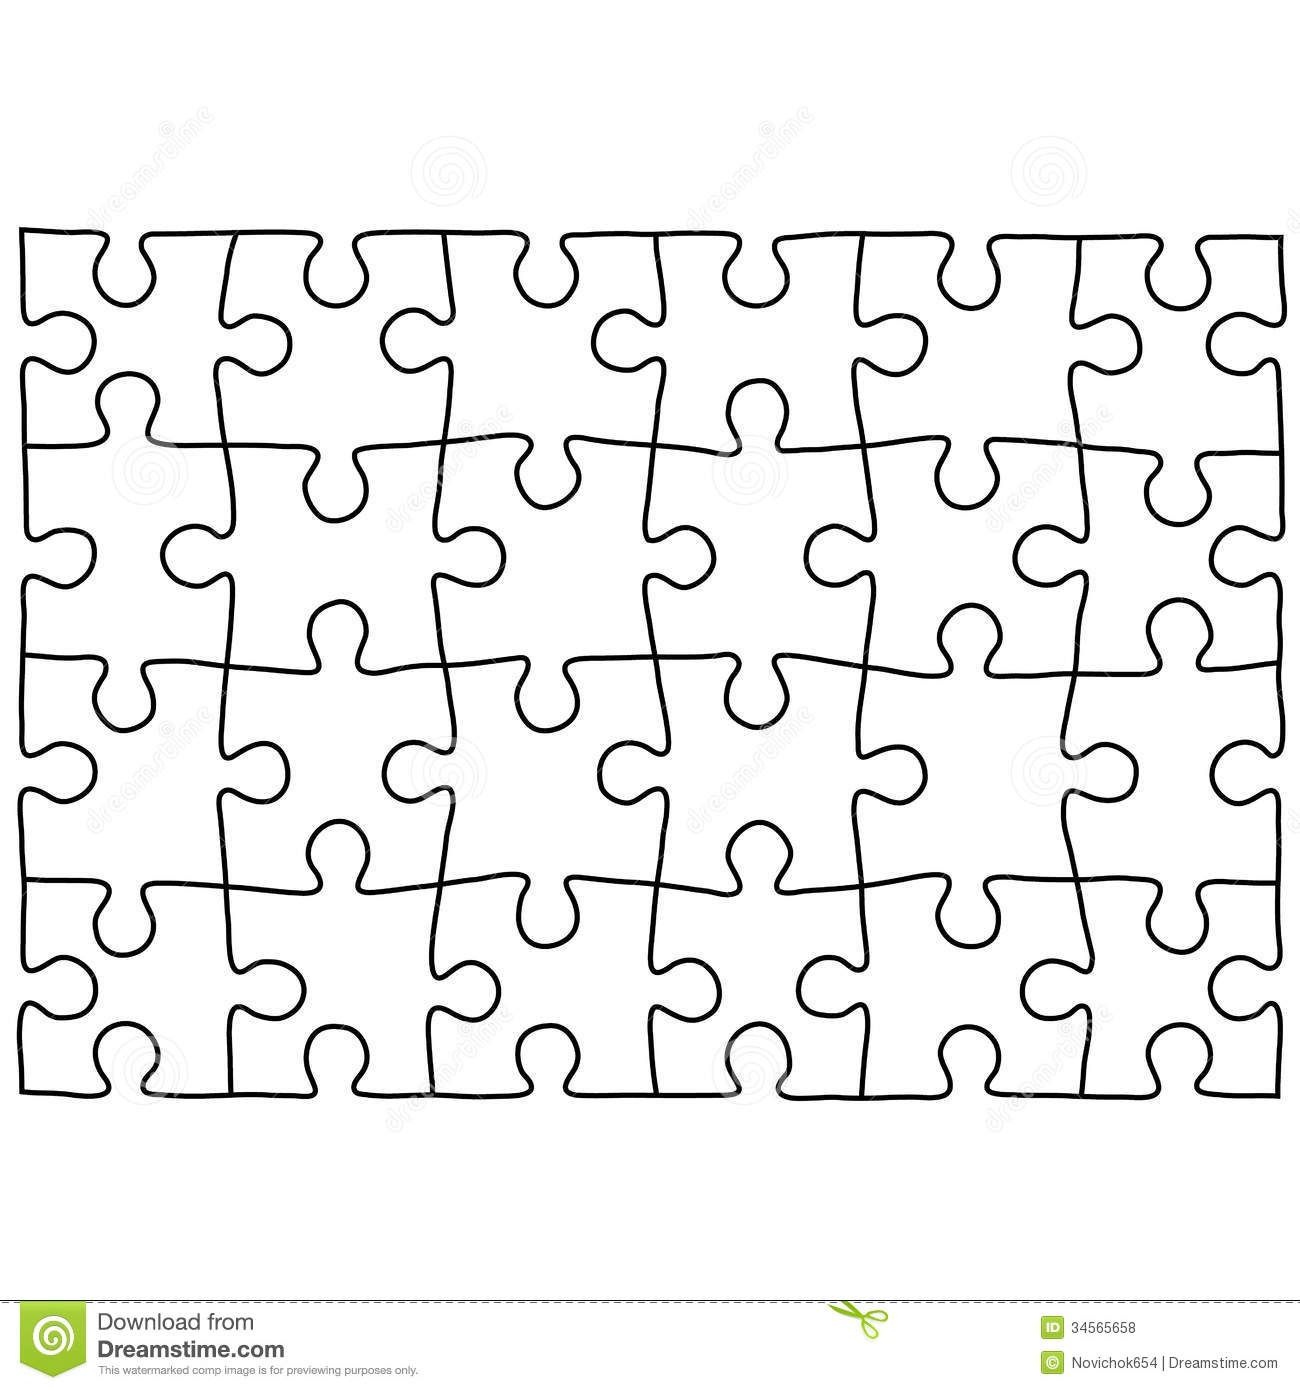 Jigsaw Puzzle Design Template | Free Puzzle Templates 1300.1390 - Jigsaw Puzzle Maker Free Printable